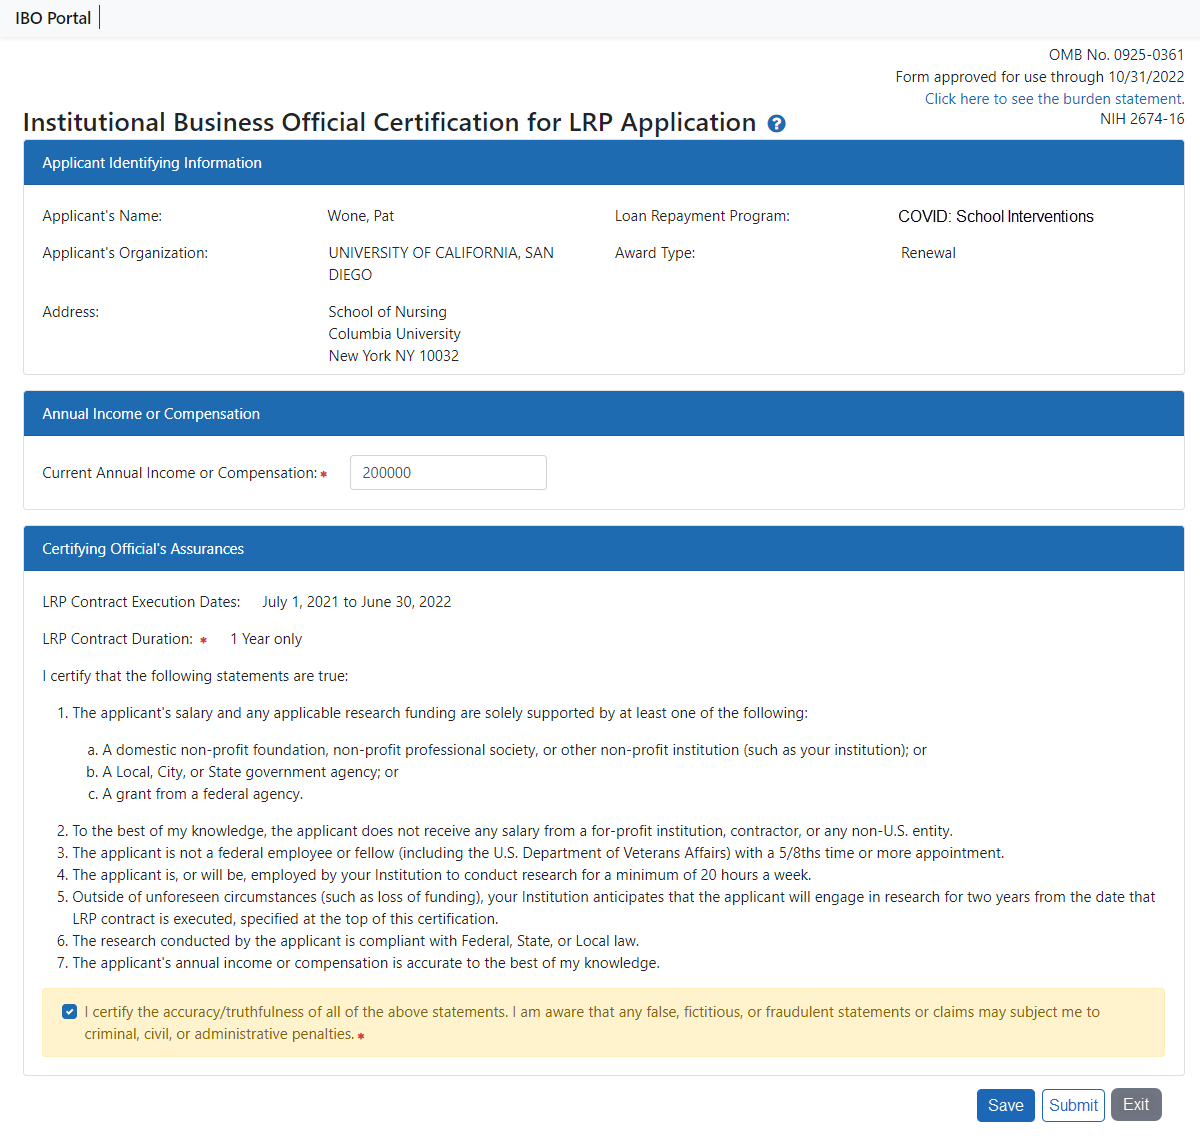 IBO Certification for LRP Applications - Renewal